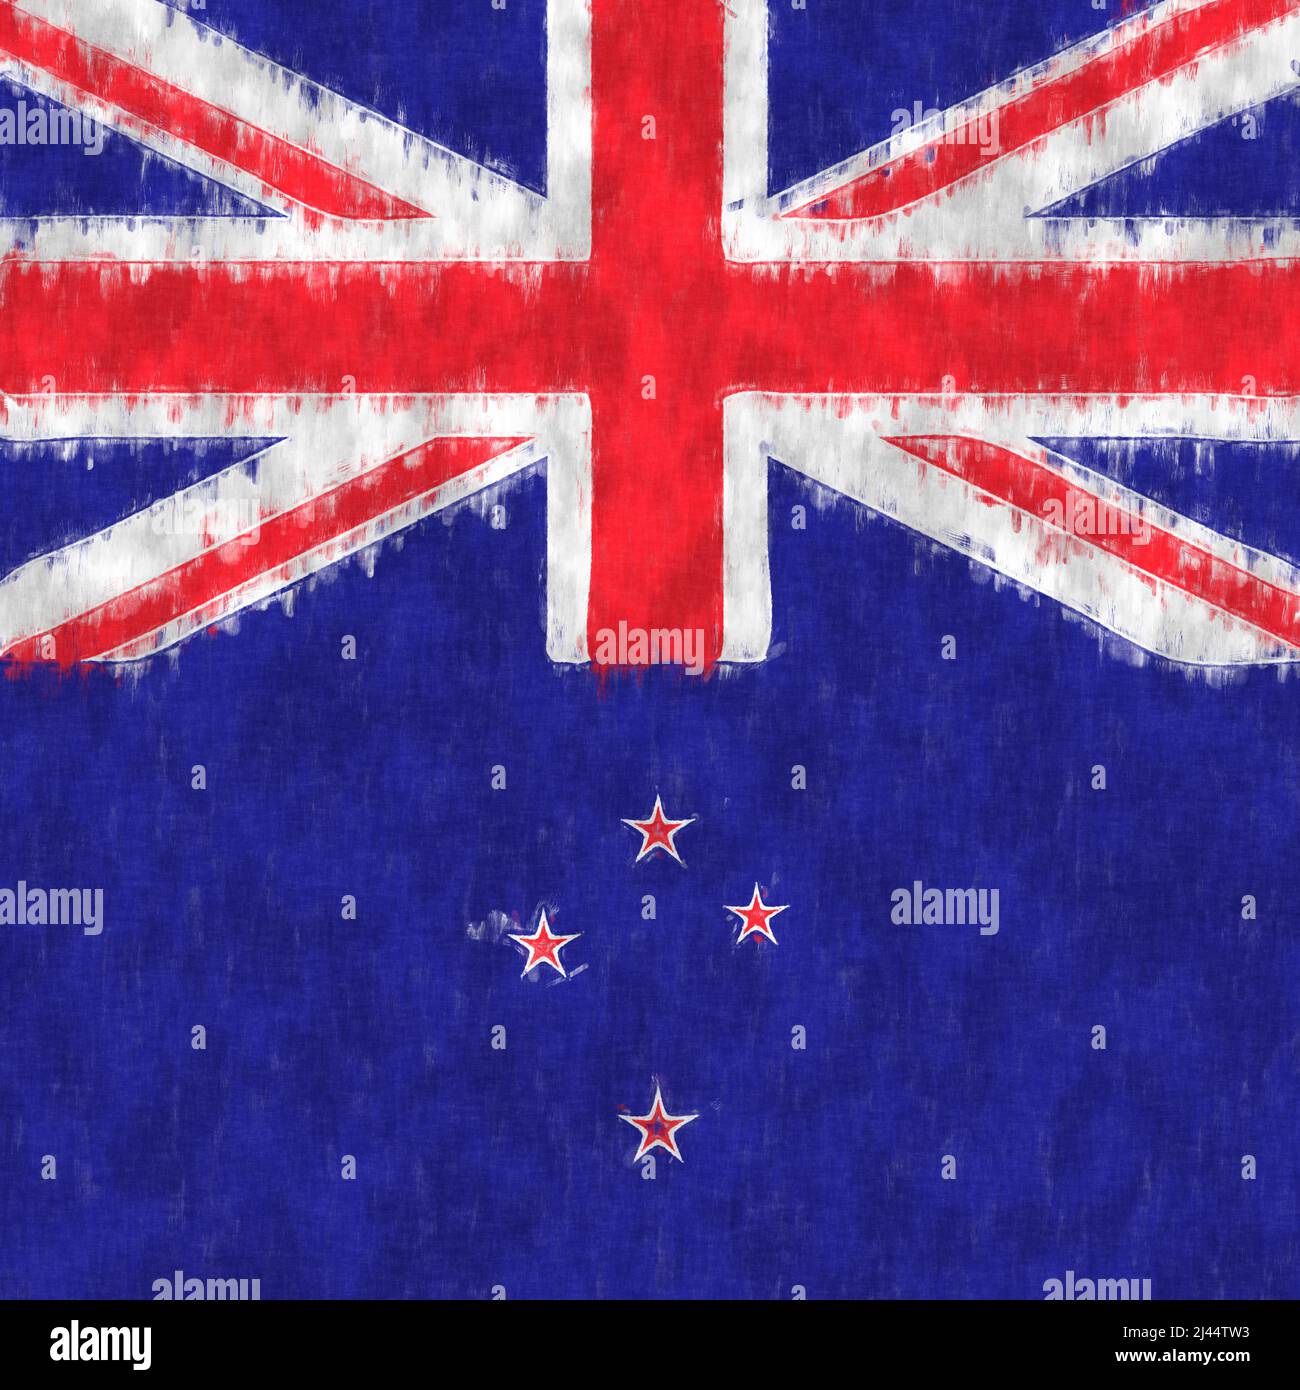 New Zeland oil painting. New Zeland emblem drawing canvas. A painted picture of a country's flag. Stock Photo